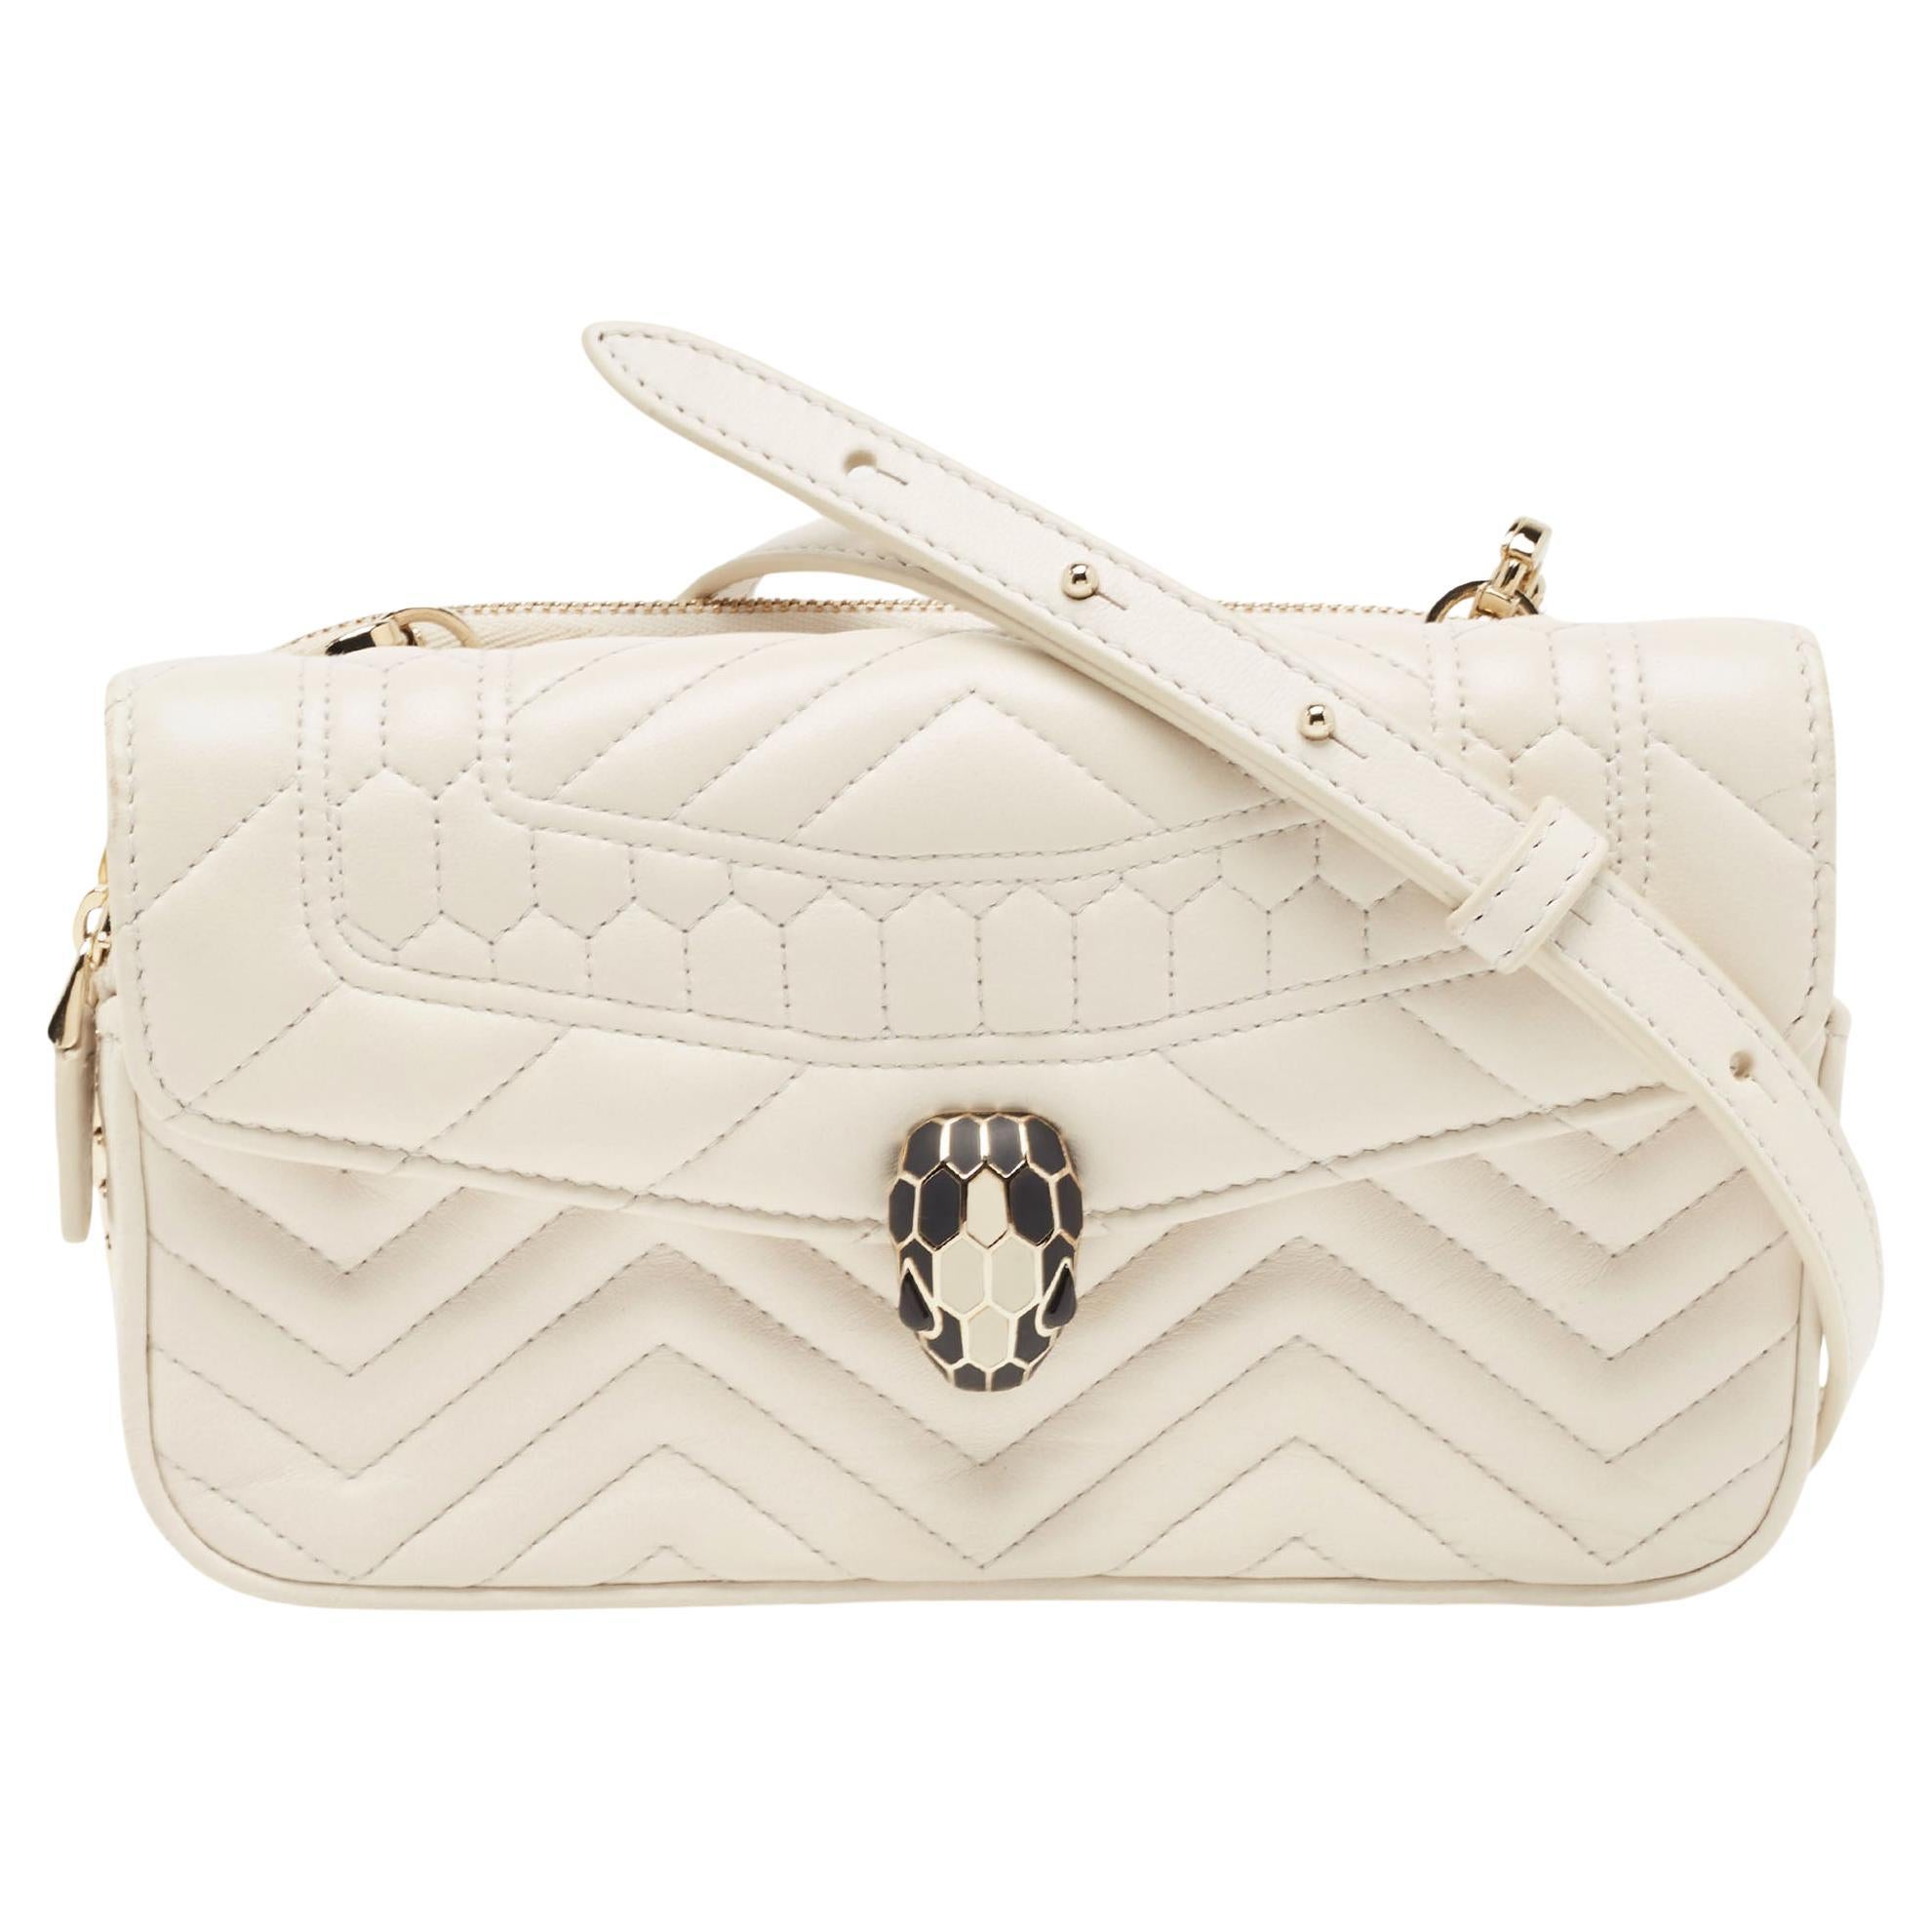 Bvlgari Off White Quilted Leather Serpenti Forever Convertible Belt Bag For Sale